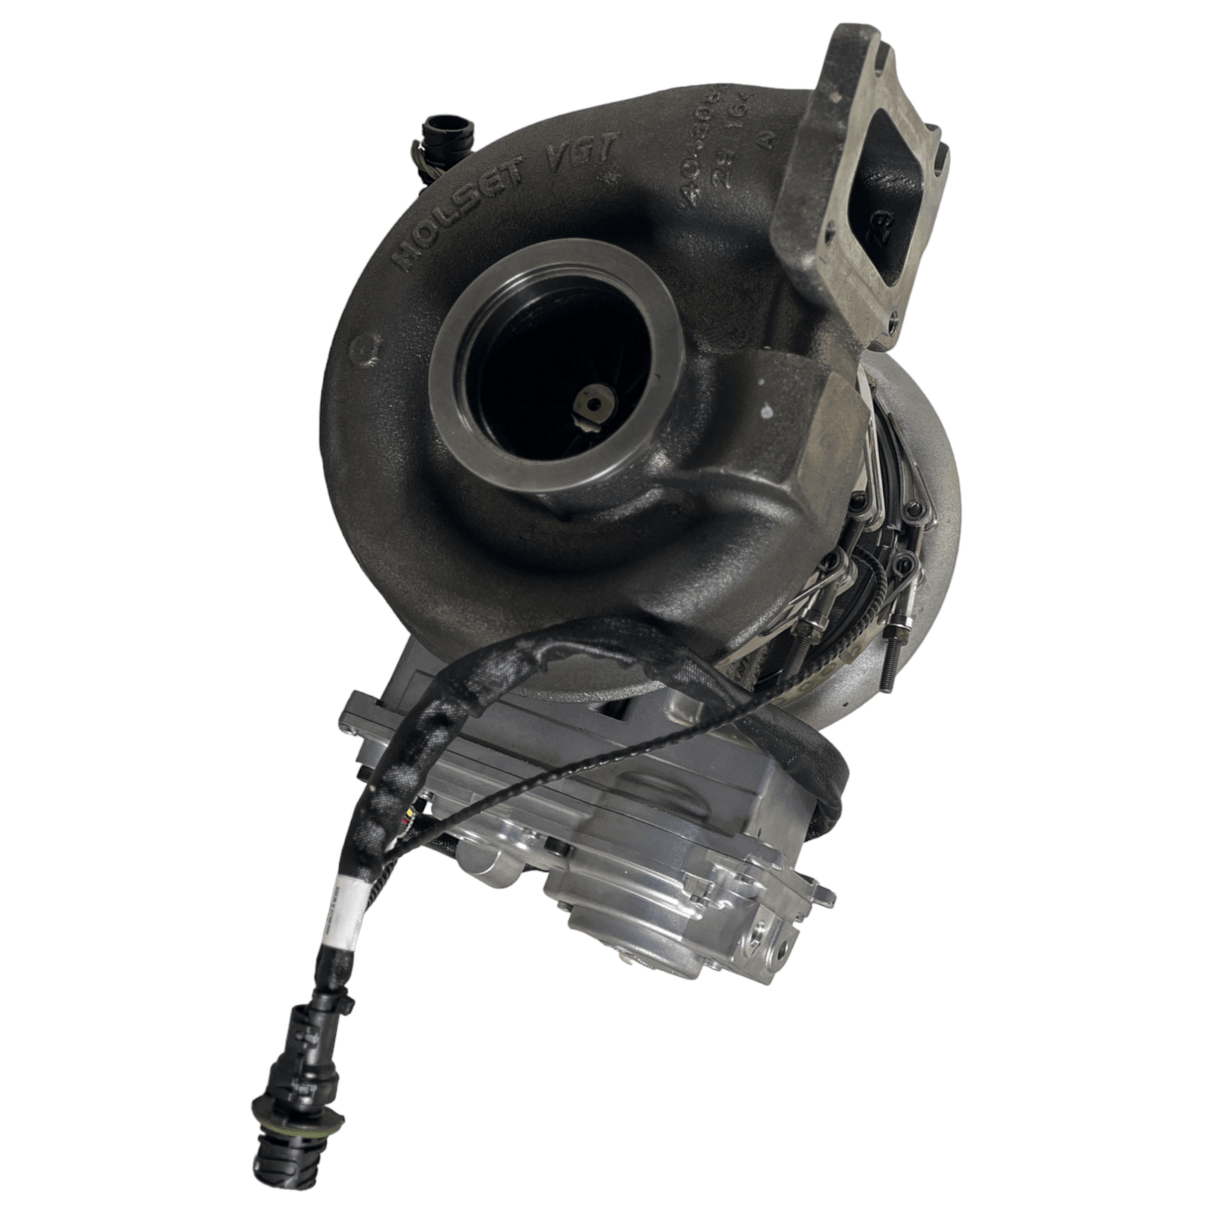 5355451 Genuine Mack® Turbocharger With Actuator For Mack Mp7 11L 325& 405Hp.